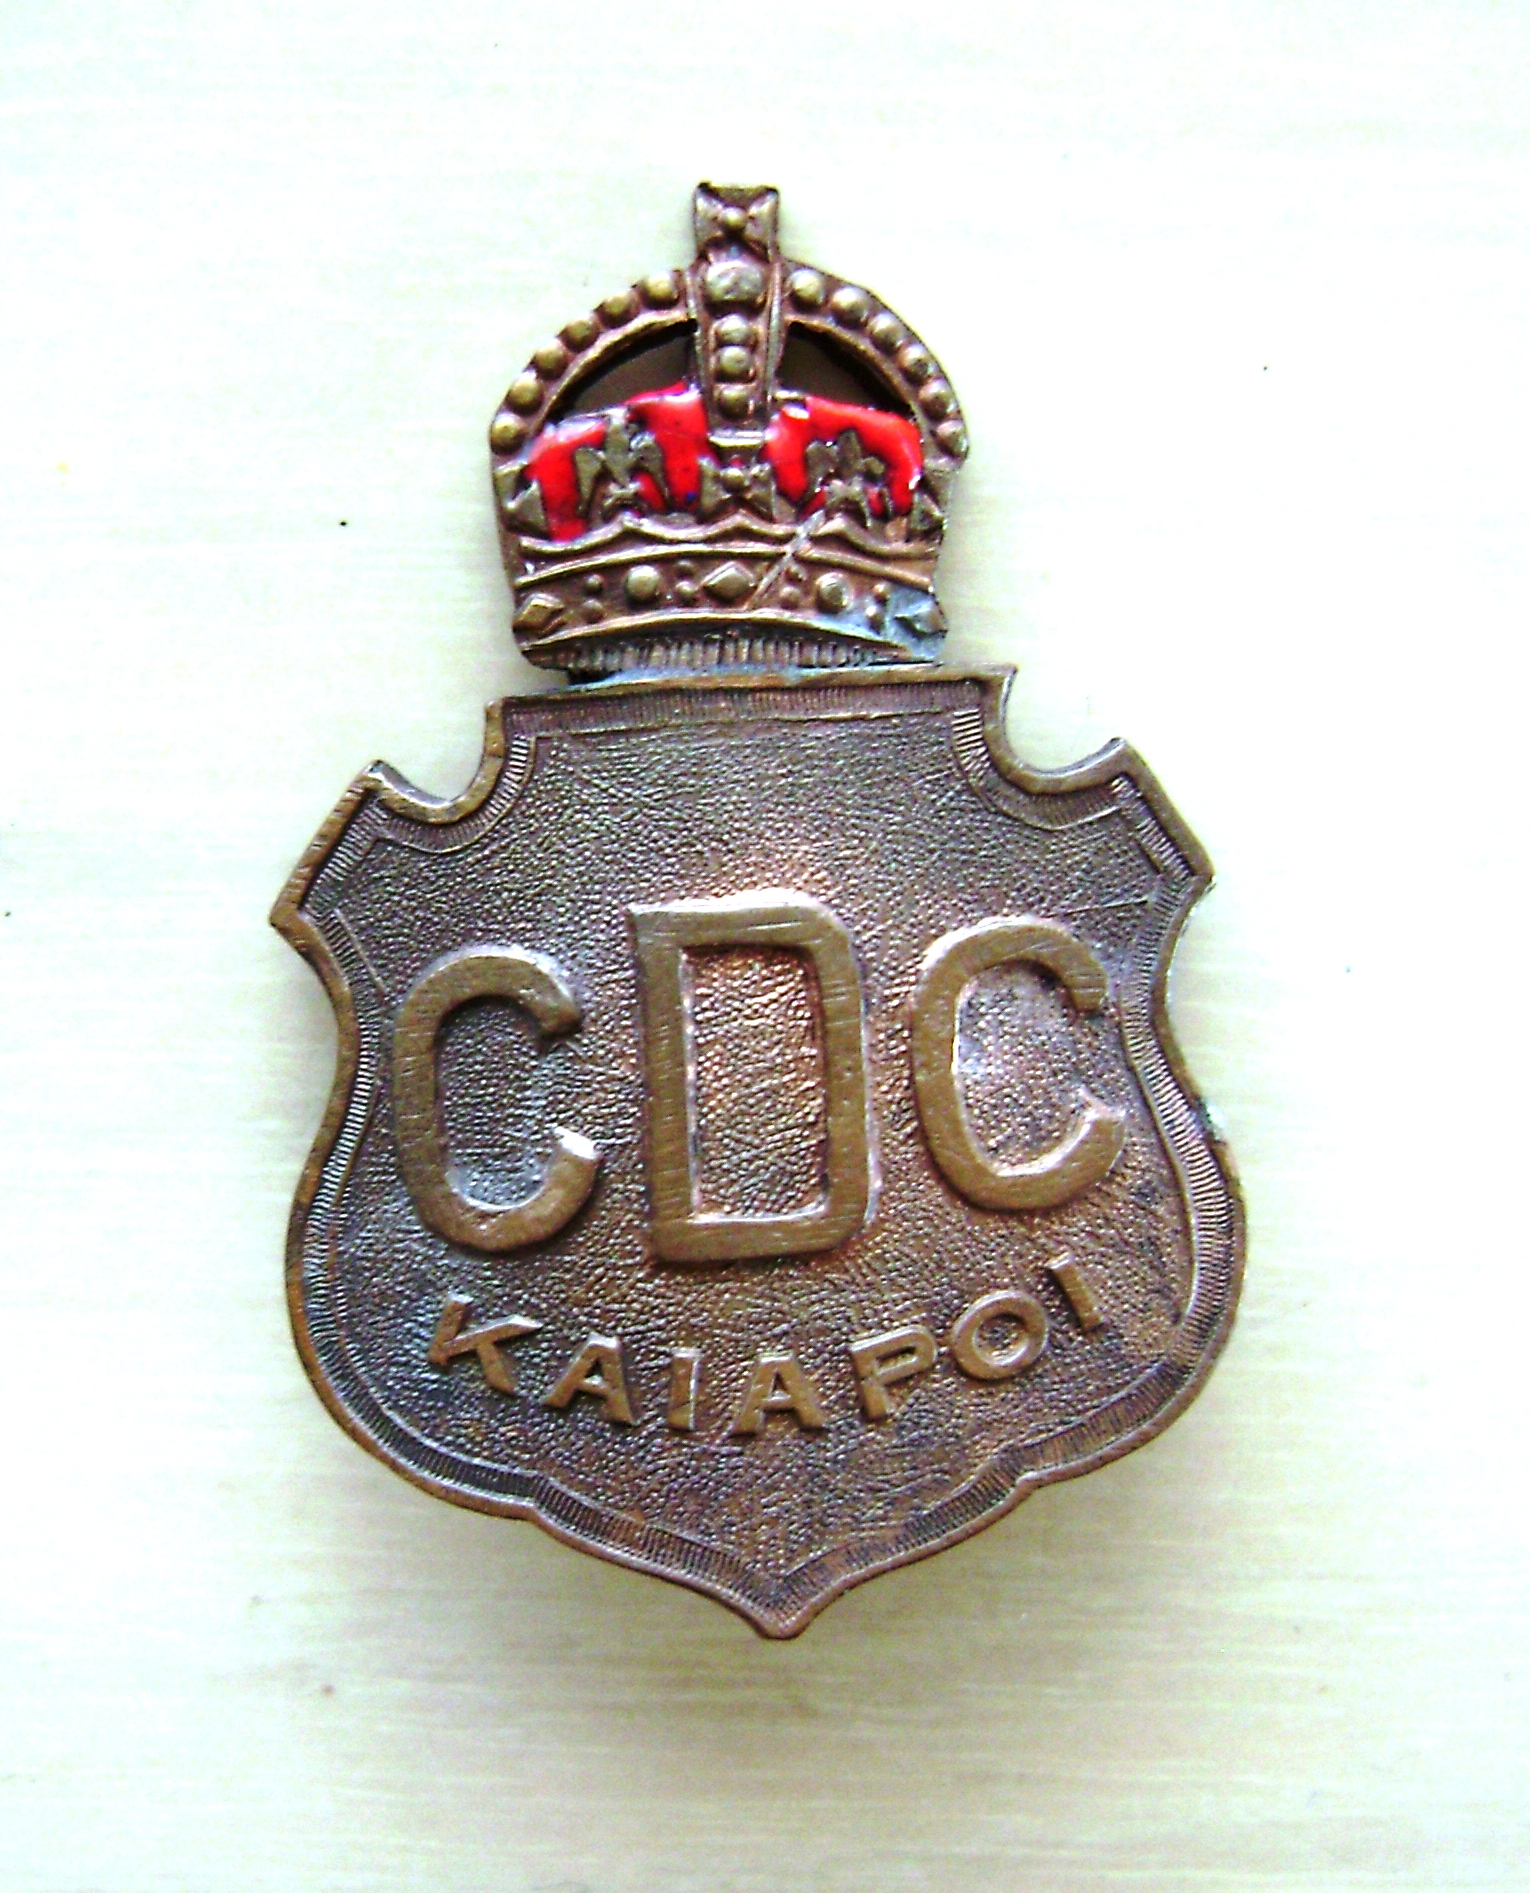 CDC Kaiapoi Crown, C Hooper Collection